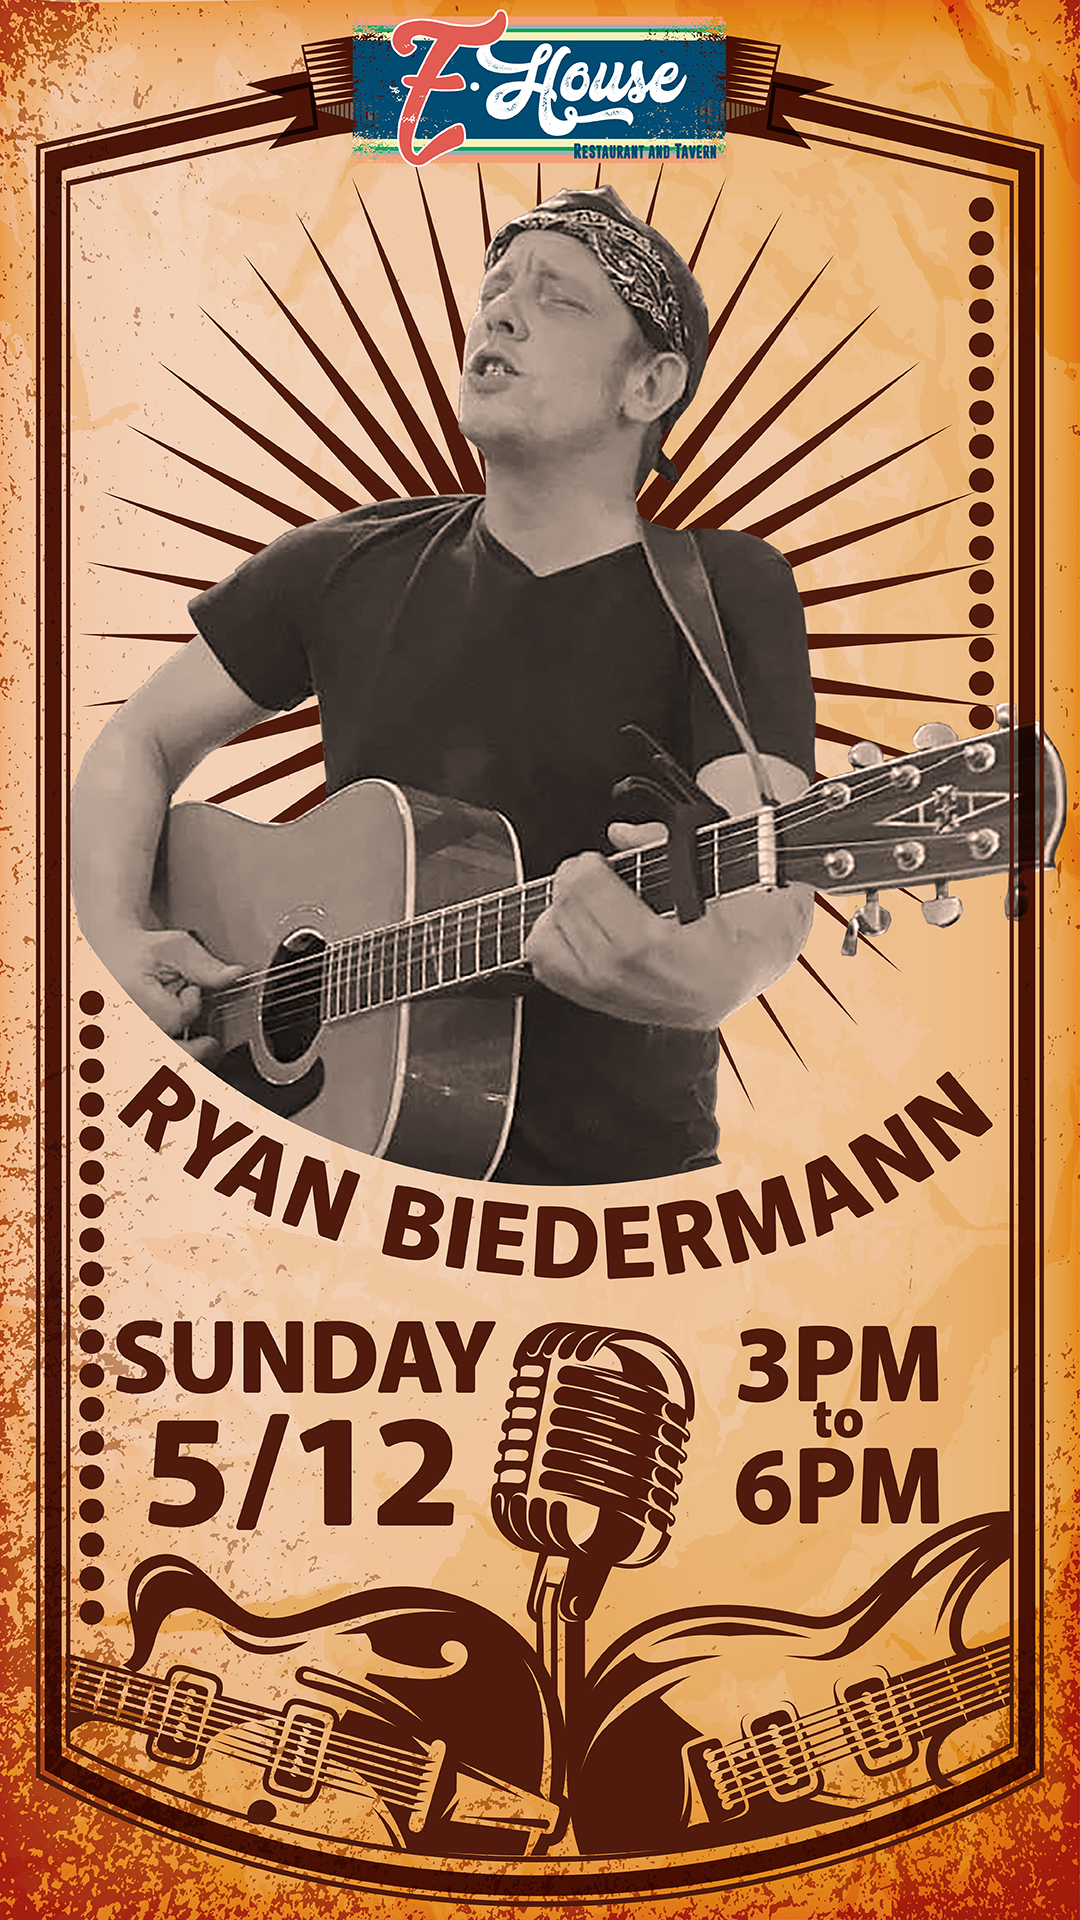 Concert poster featuring a black and white image of a man playing a guitar with event details for ryan biedermann at e-house on may 12, from 3 to 6 pm.